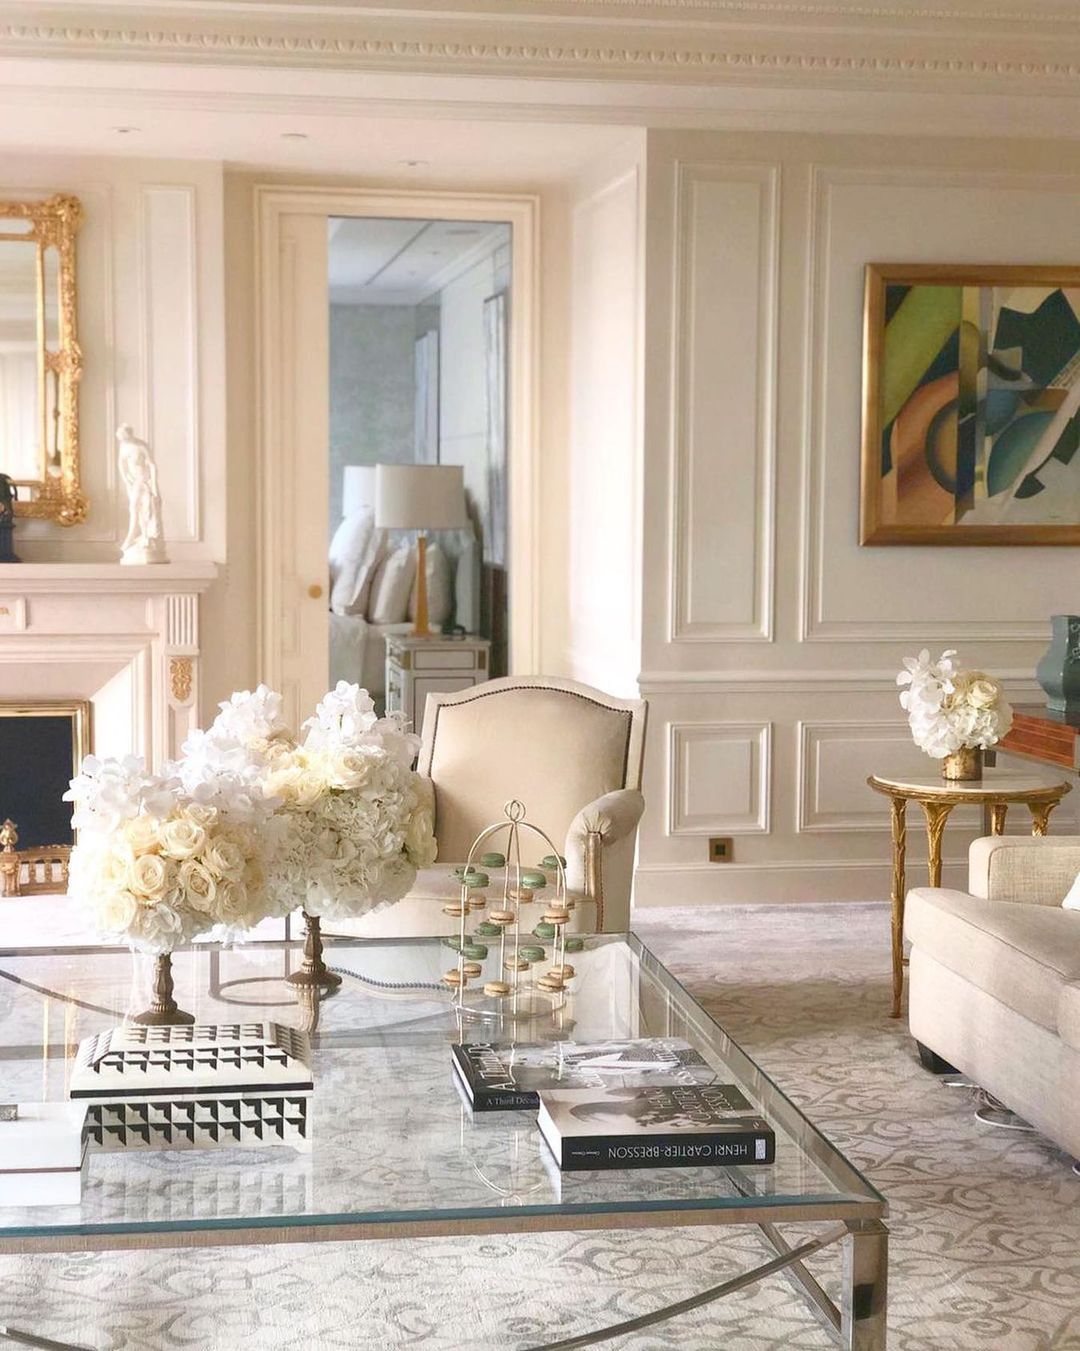 A chic cream palette fills the Royal Suite at Four Seasons Hotel George V Paris